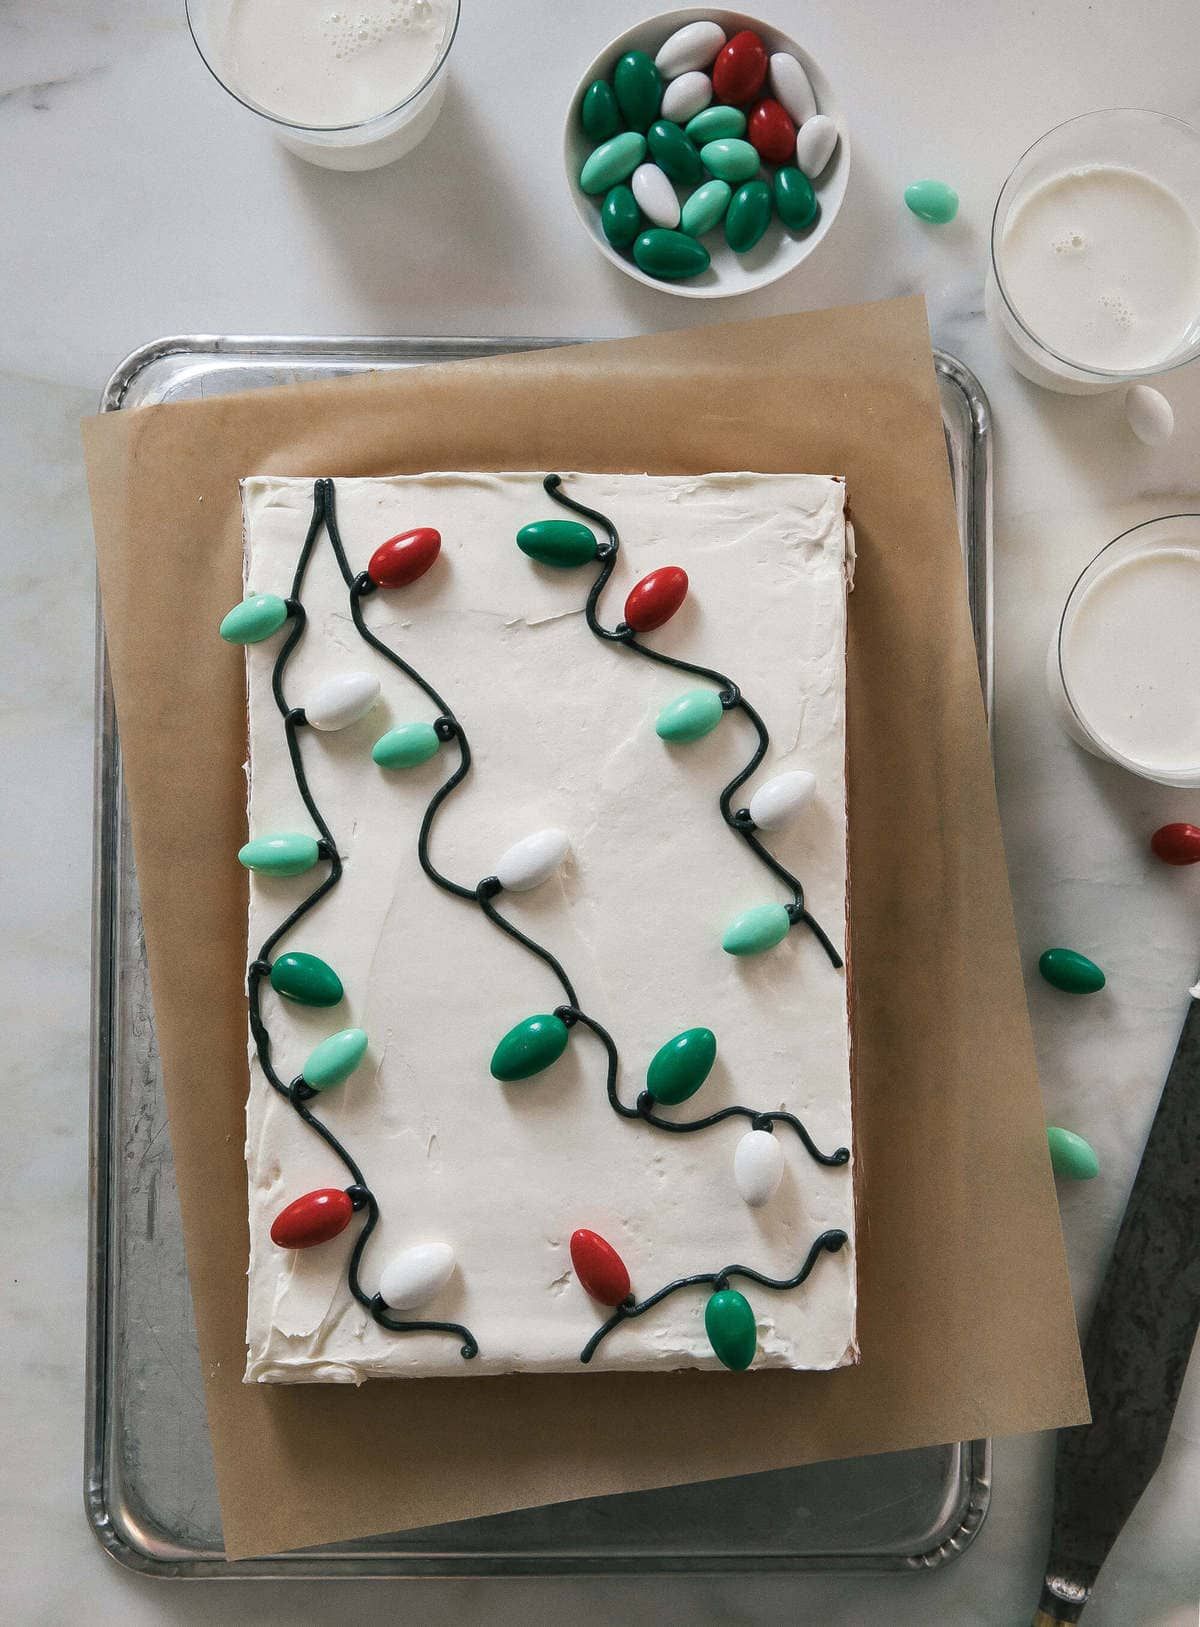 The Best Birthday Cake Recipes, From Layer Cakes To Sheet Cakes | HuffPost  Life